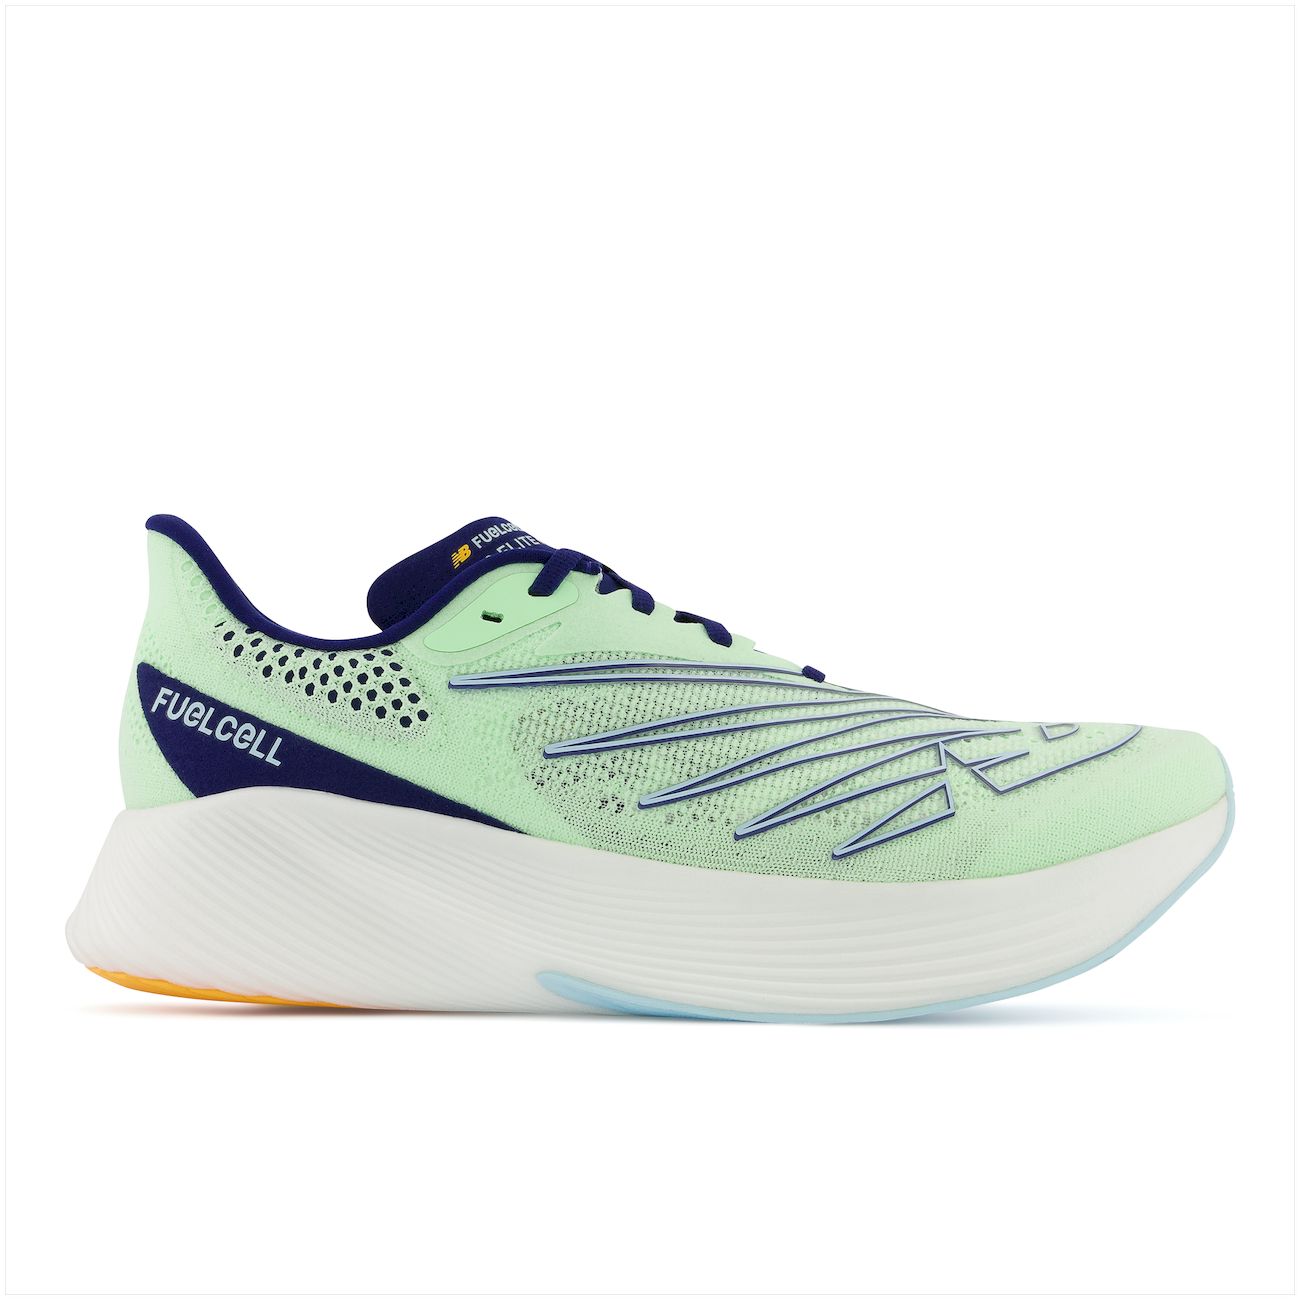 New Balance Fuelcell RC Elite V2 - Chaussures running homme | Hardloop